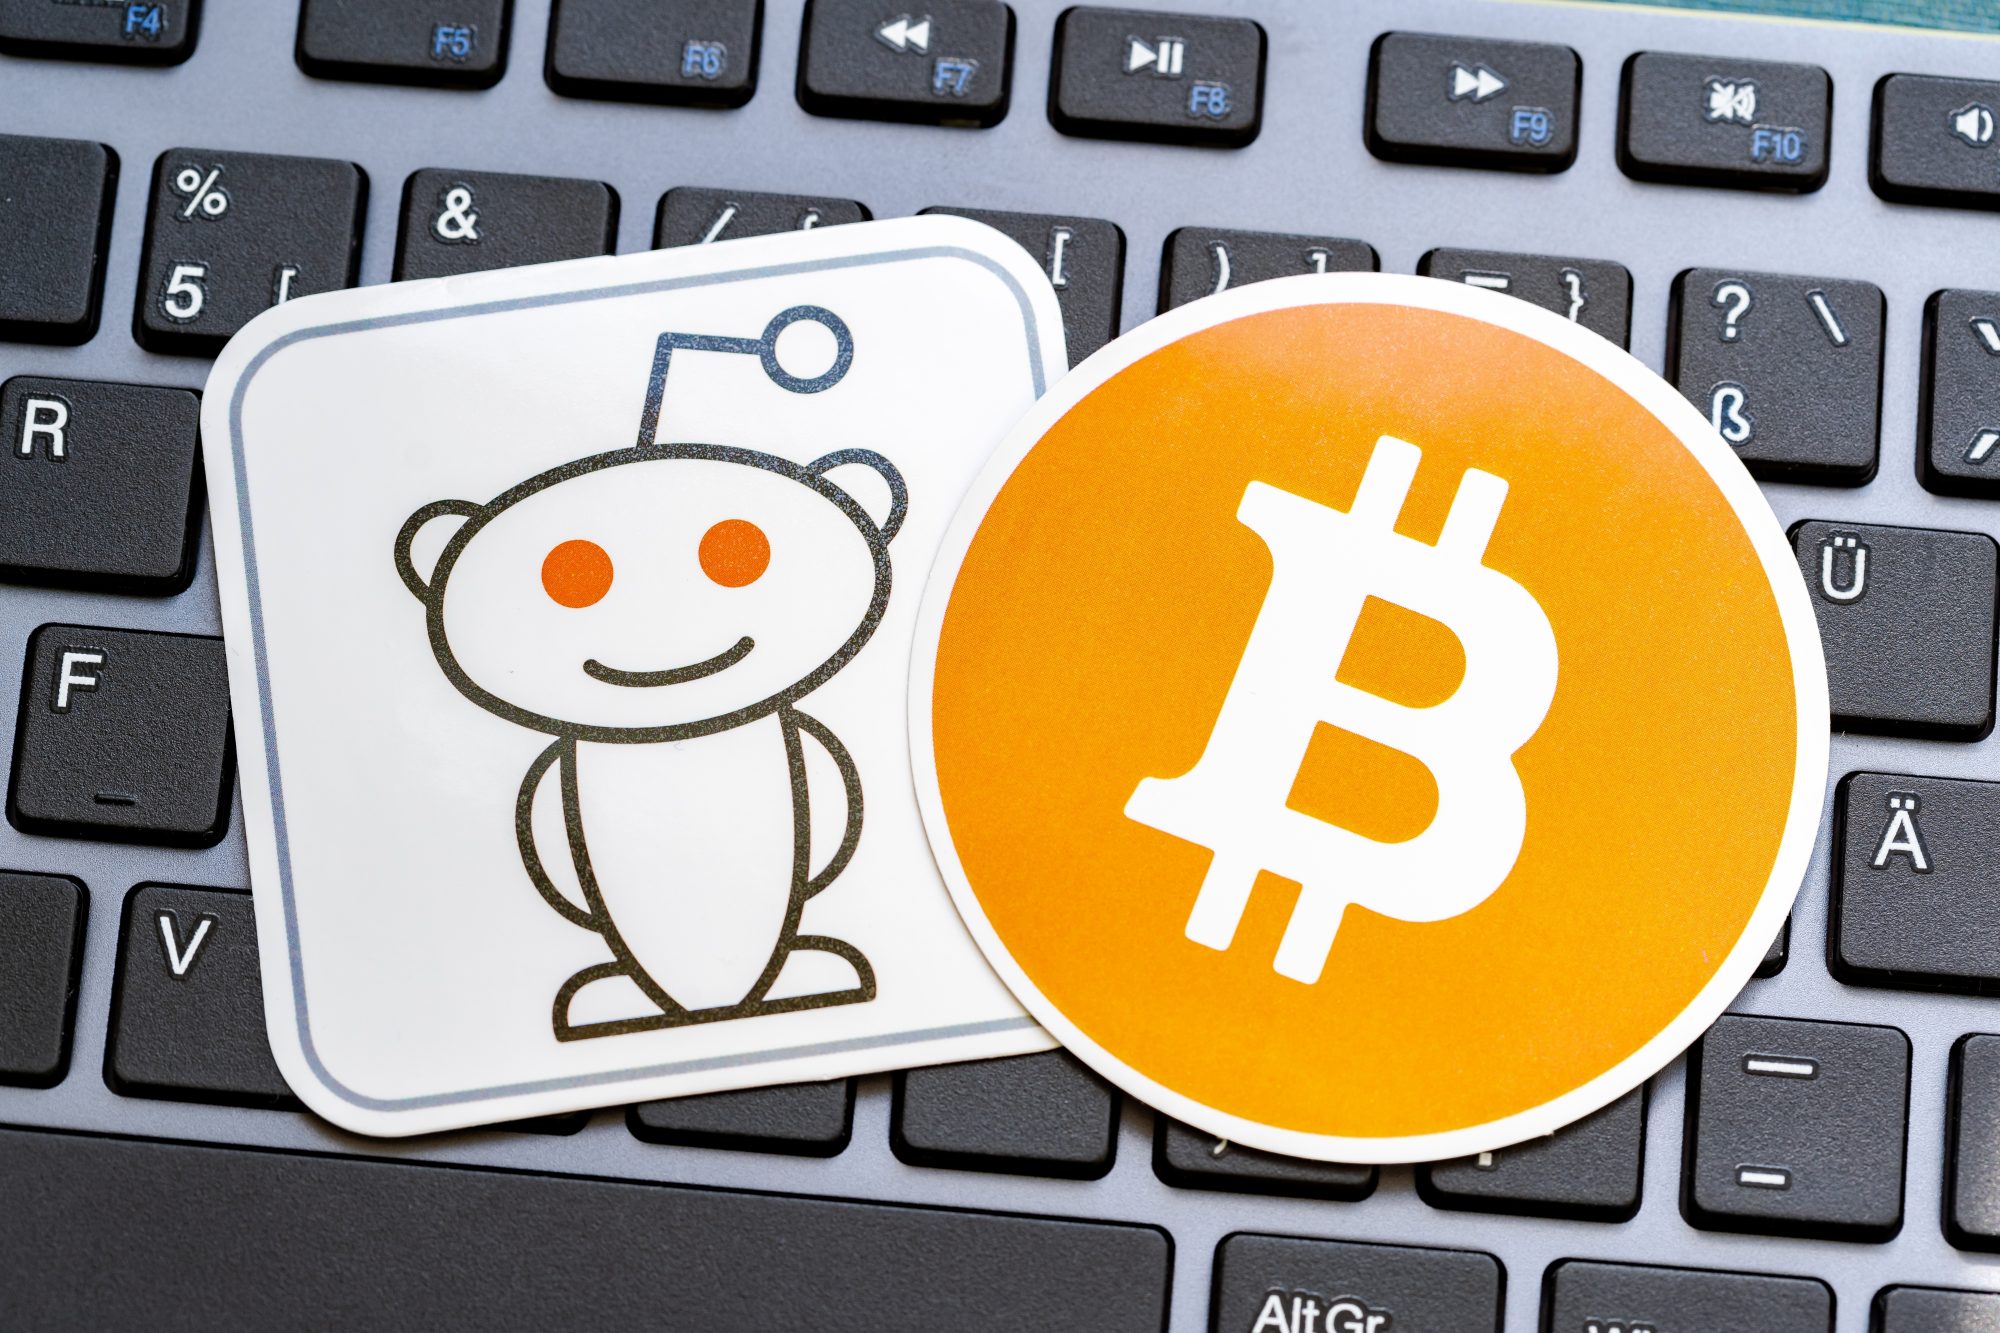 Best crypto to invest in according to reddit